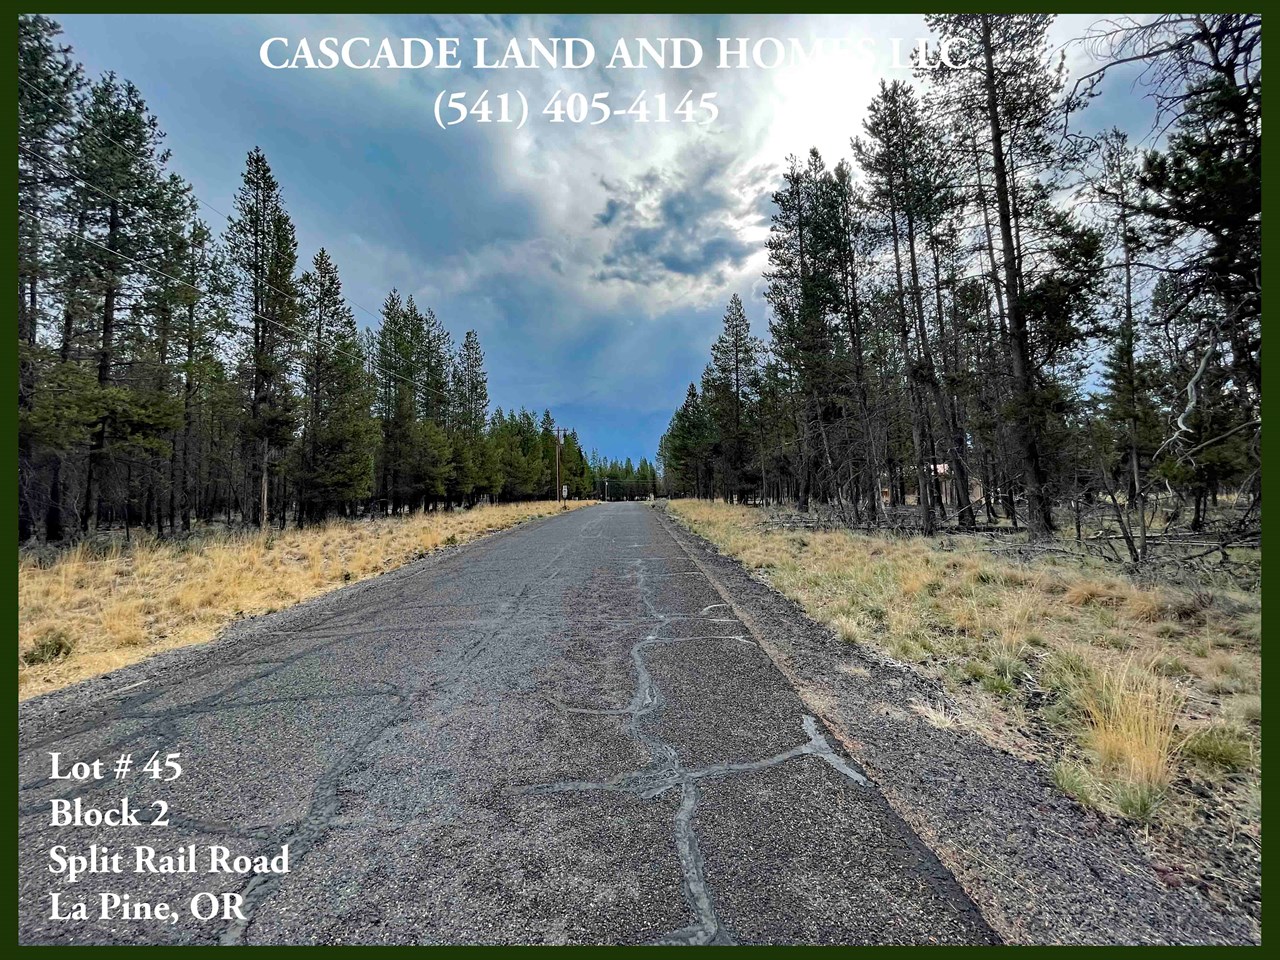 easy access the roads within the subdivision are paved and maintained. it was very easy to access the property. you could easily bring your large rv or horse trailer into your new property with no trouble at all.